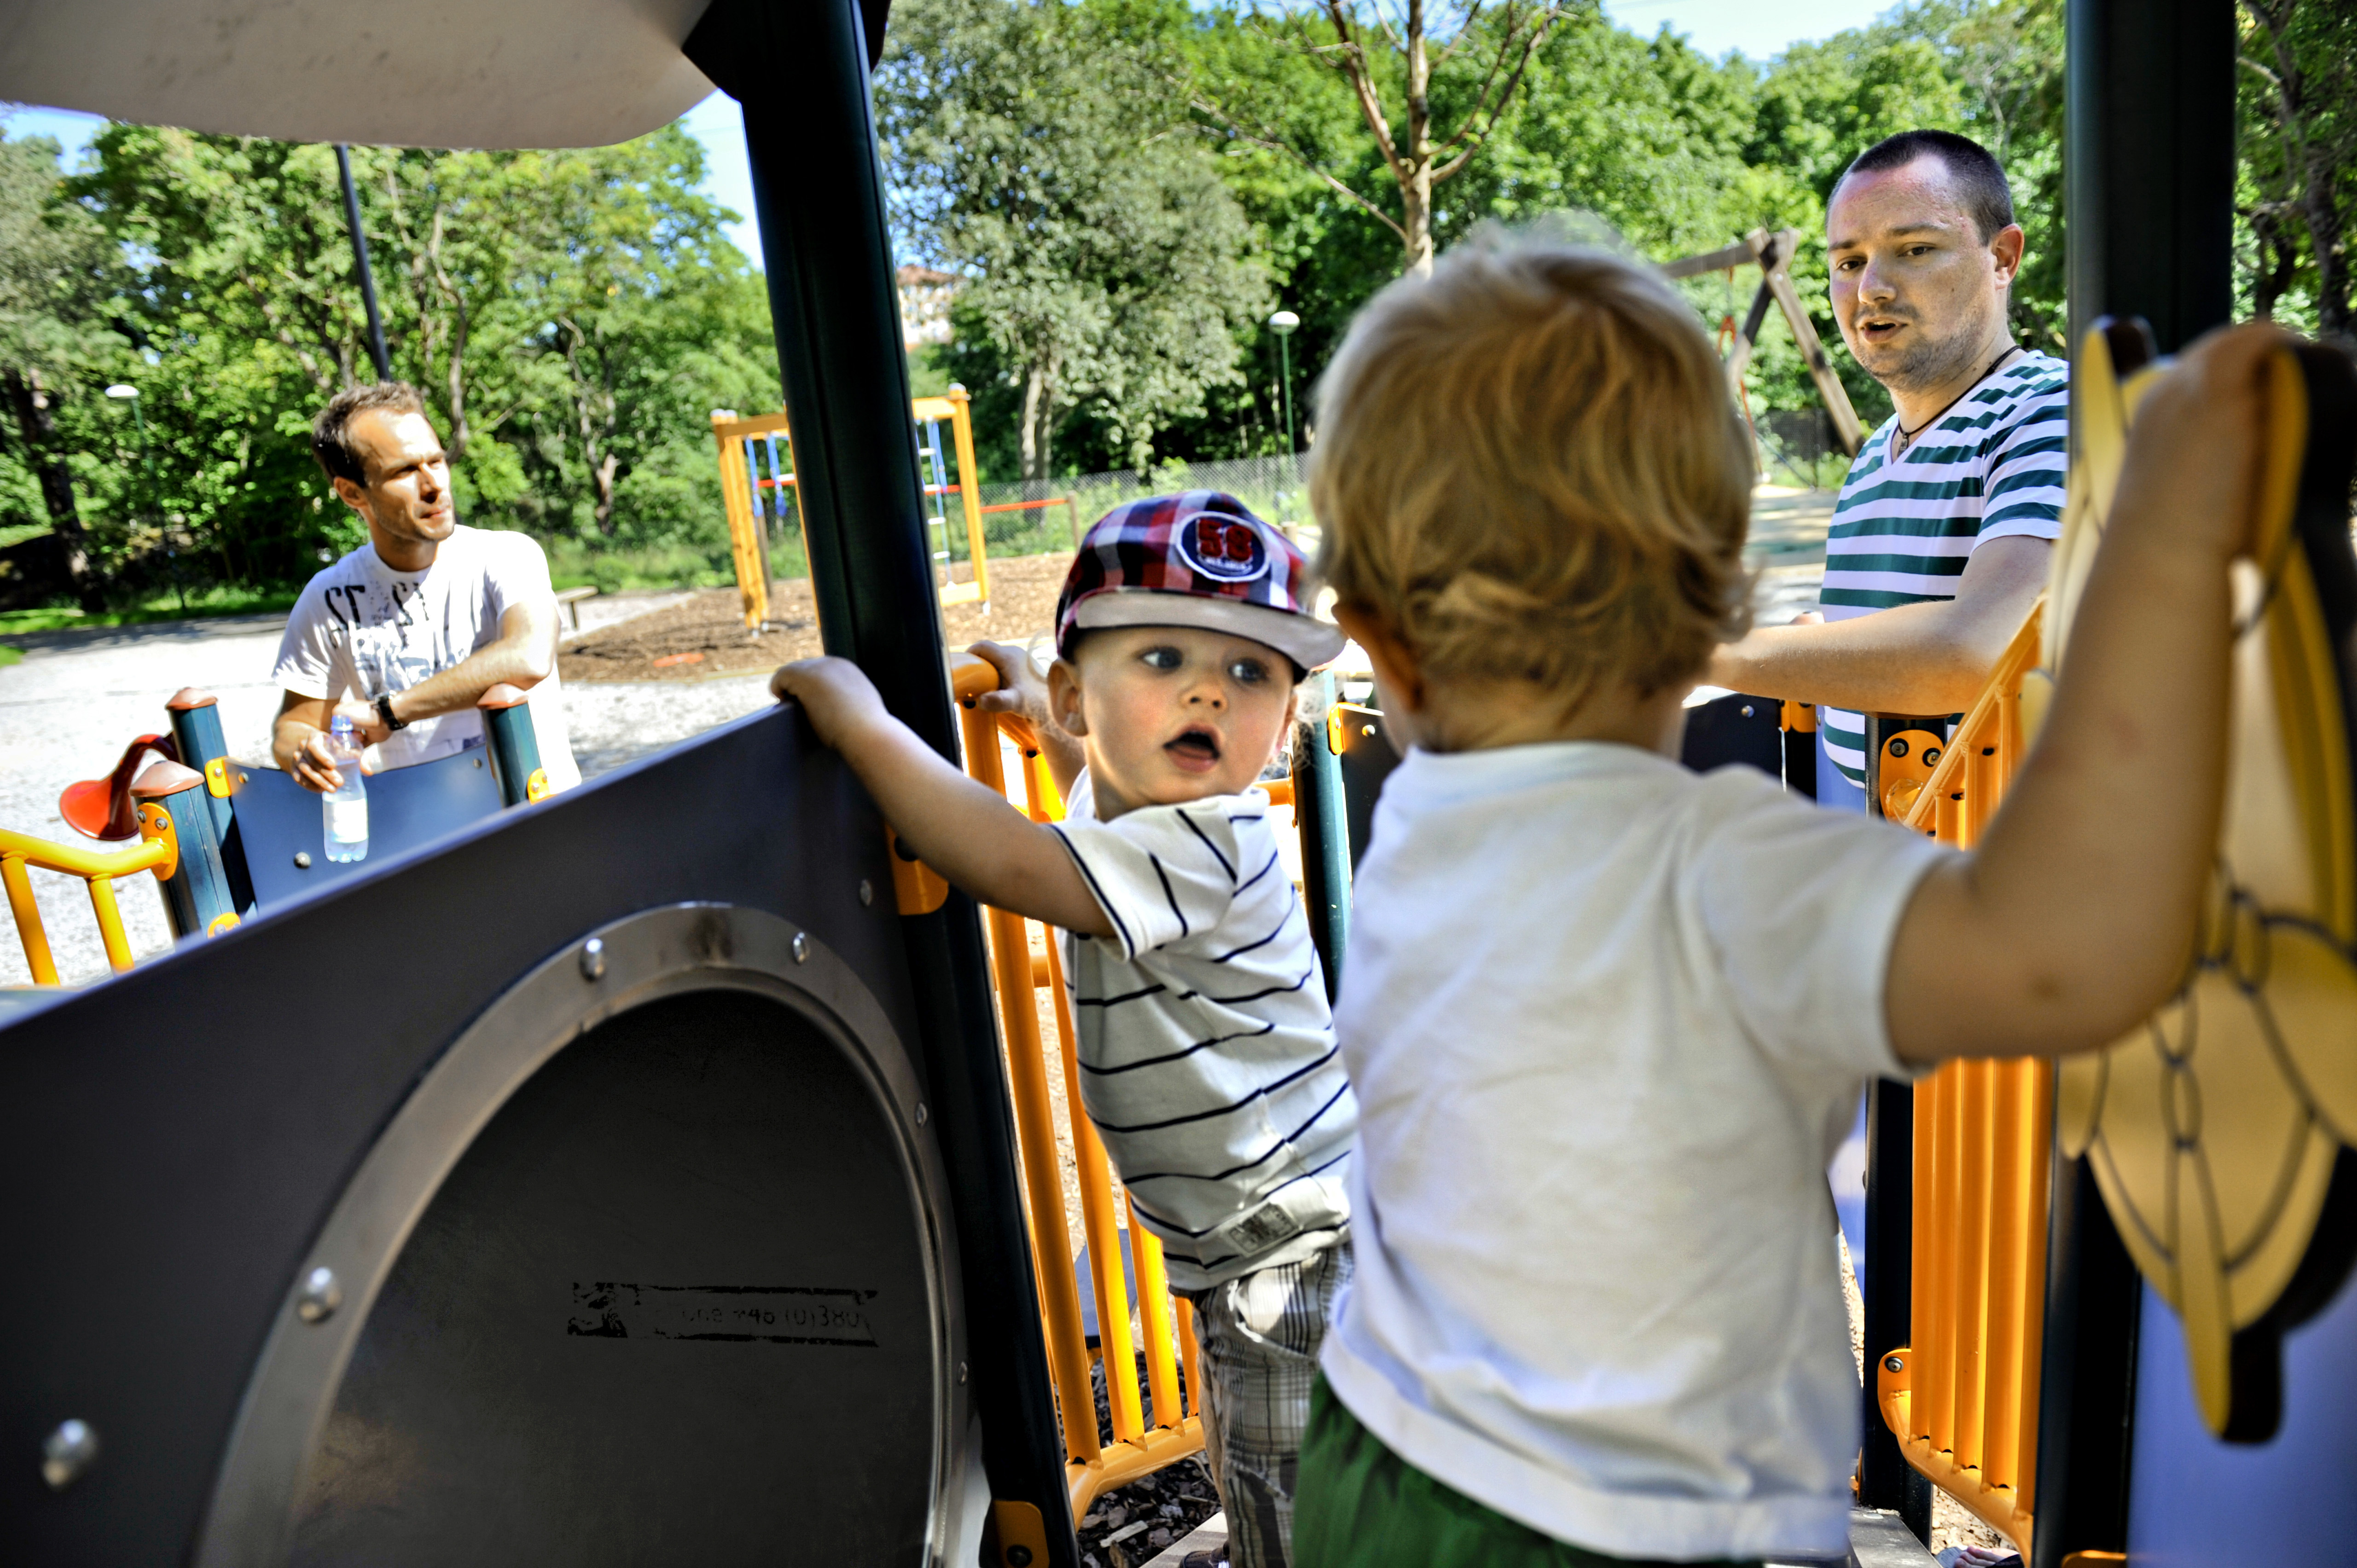 FILE - Henrik Holgersson, right, watches his son, Arvid, center with hat, play with Walter Johansson accompanied by his father Henrik Johansson at a playground in Stockholm, Sweden, Wednesday June 29, 2011. Fifty years after Sweden became the first country in the world to introduce paid parental leave for fathers, the Scandinavian country has launched a groundbreaking new law granting paid leave allowing grandparents and other legal guardians to care for a child. The law came into effect Monday, July 1, 2024. (AP Photo/Niklas Larsson, File)